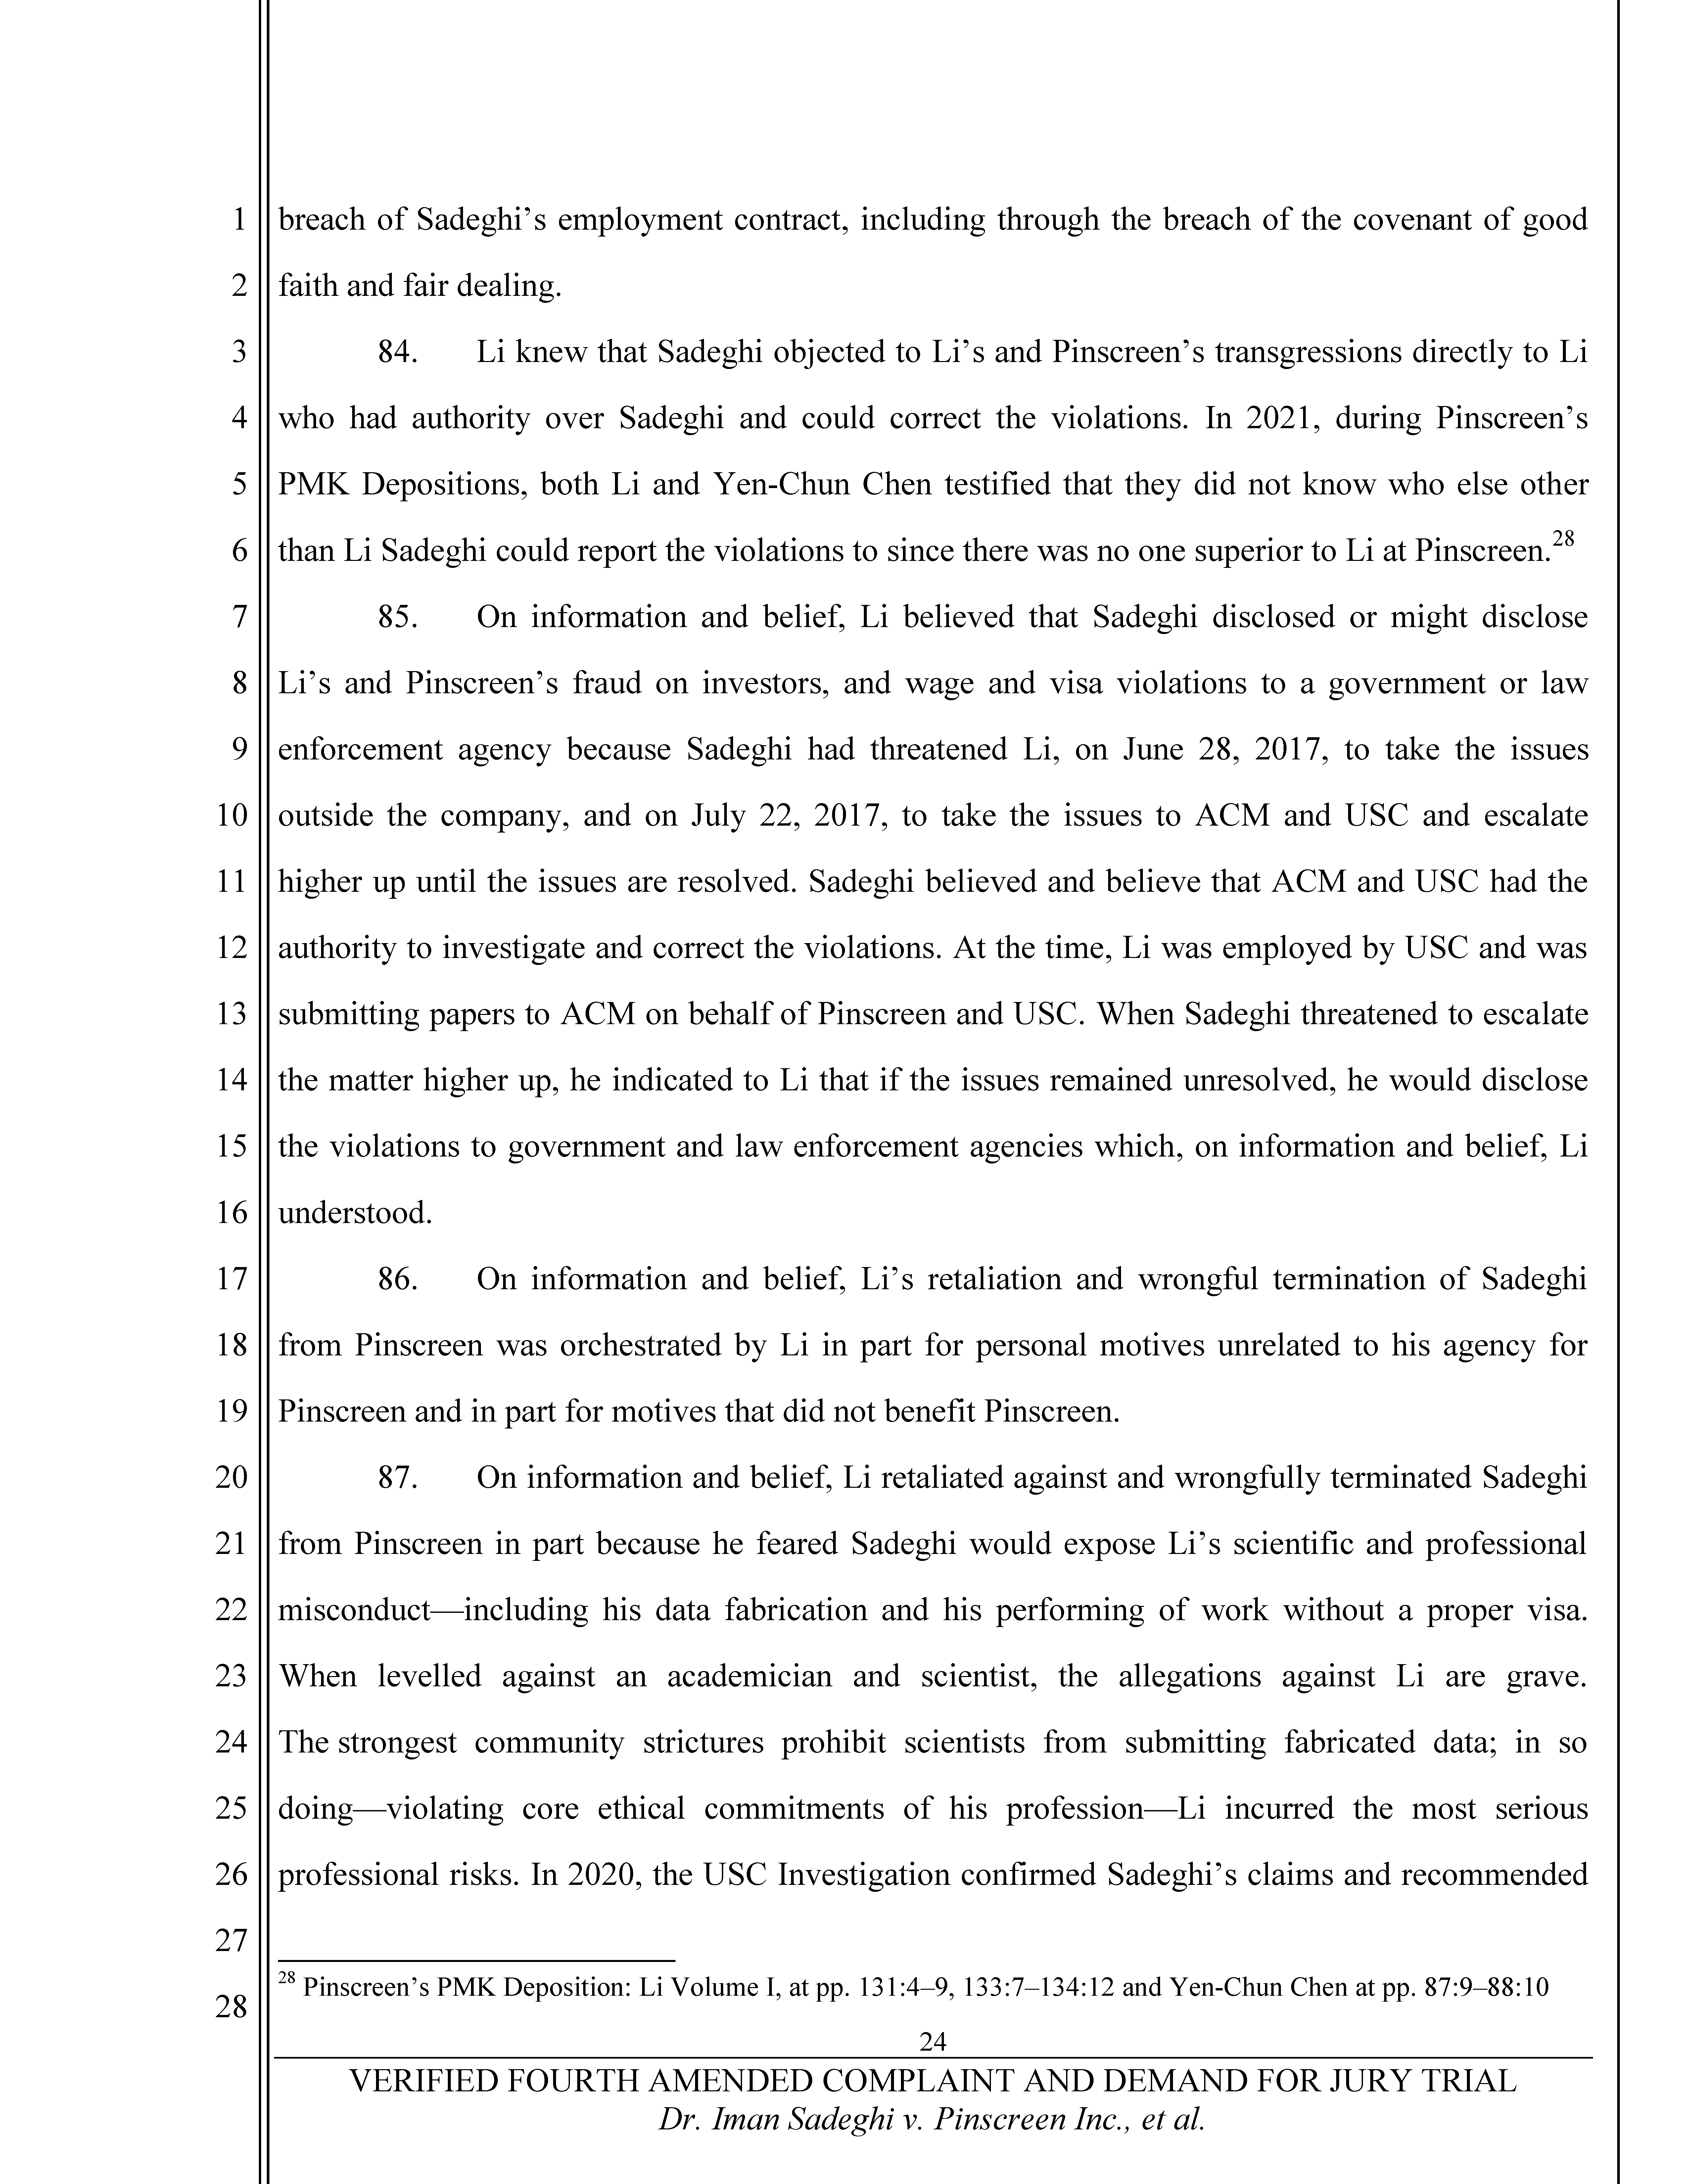 Fourth Amended Complaint (4AC) Page 25